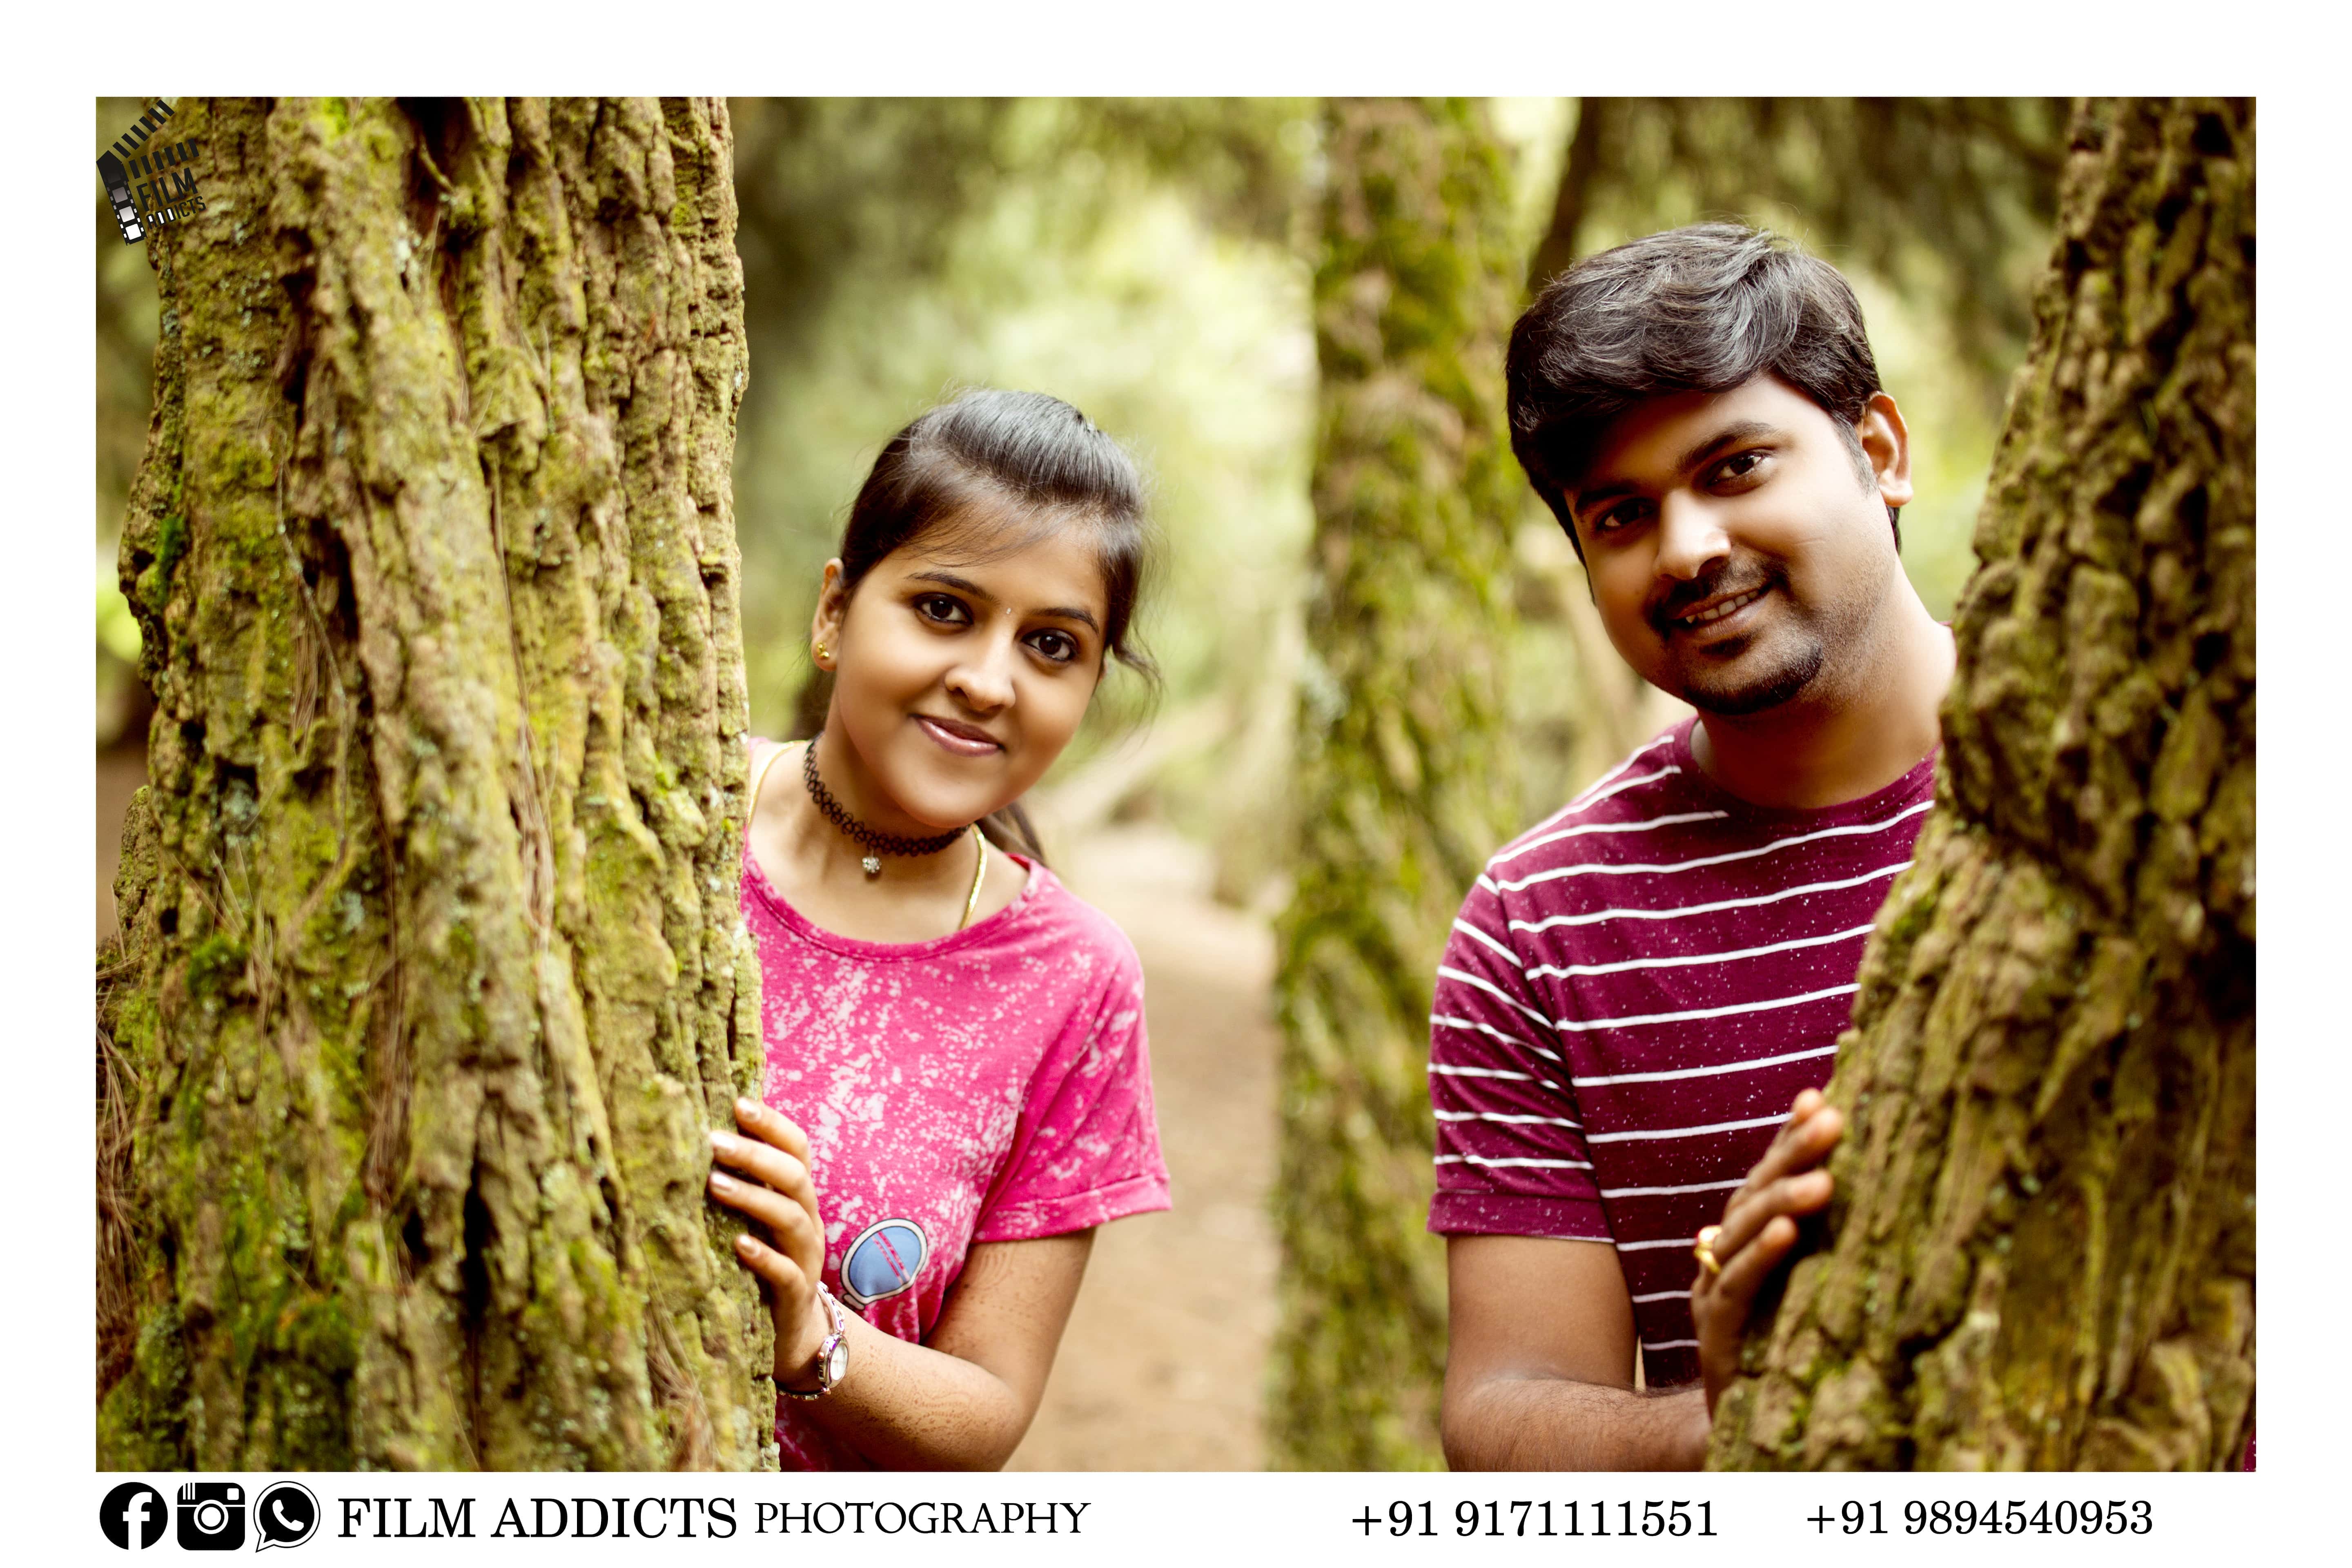 Best Outdoor Photography in Trichy ,best candid photographers in Tiruchirappalli ,Best Outdoor Candid photographers in Tiruchirappalli, Outdoor Candid Moments, FilmAddicts Photography ,FilmAddictsPhotography ,best Outdoor in Tiruchirappalli, Best Candid shoot in Tiruchirappalli, Best moment ,Best Outdoor moments  , Best Outdoor Photography in Trichy, Best Outdoor videography in Tiruchirappalli, Bestcoupleshoot, Best candid, Best Outdoor shoot, Best Outdoor candid, best marriage photographers in Tiruchirappalli, best marriage photography in Tiruchirappalli, best candid photography, best Tiruchirappalli photography, Tiruchirappalli ,Tiruchirappalli photography ,Tiruchirappalli couples ,candid shoot ,candid ,tamilnadu Outdoor photography, best photographers in Tiruchirappalli,  Tamilnadu